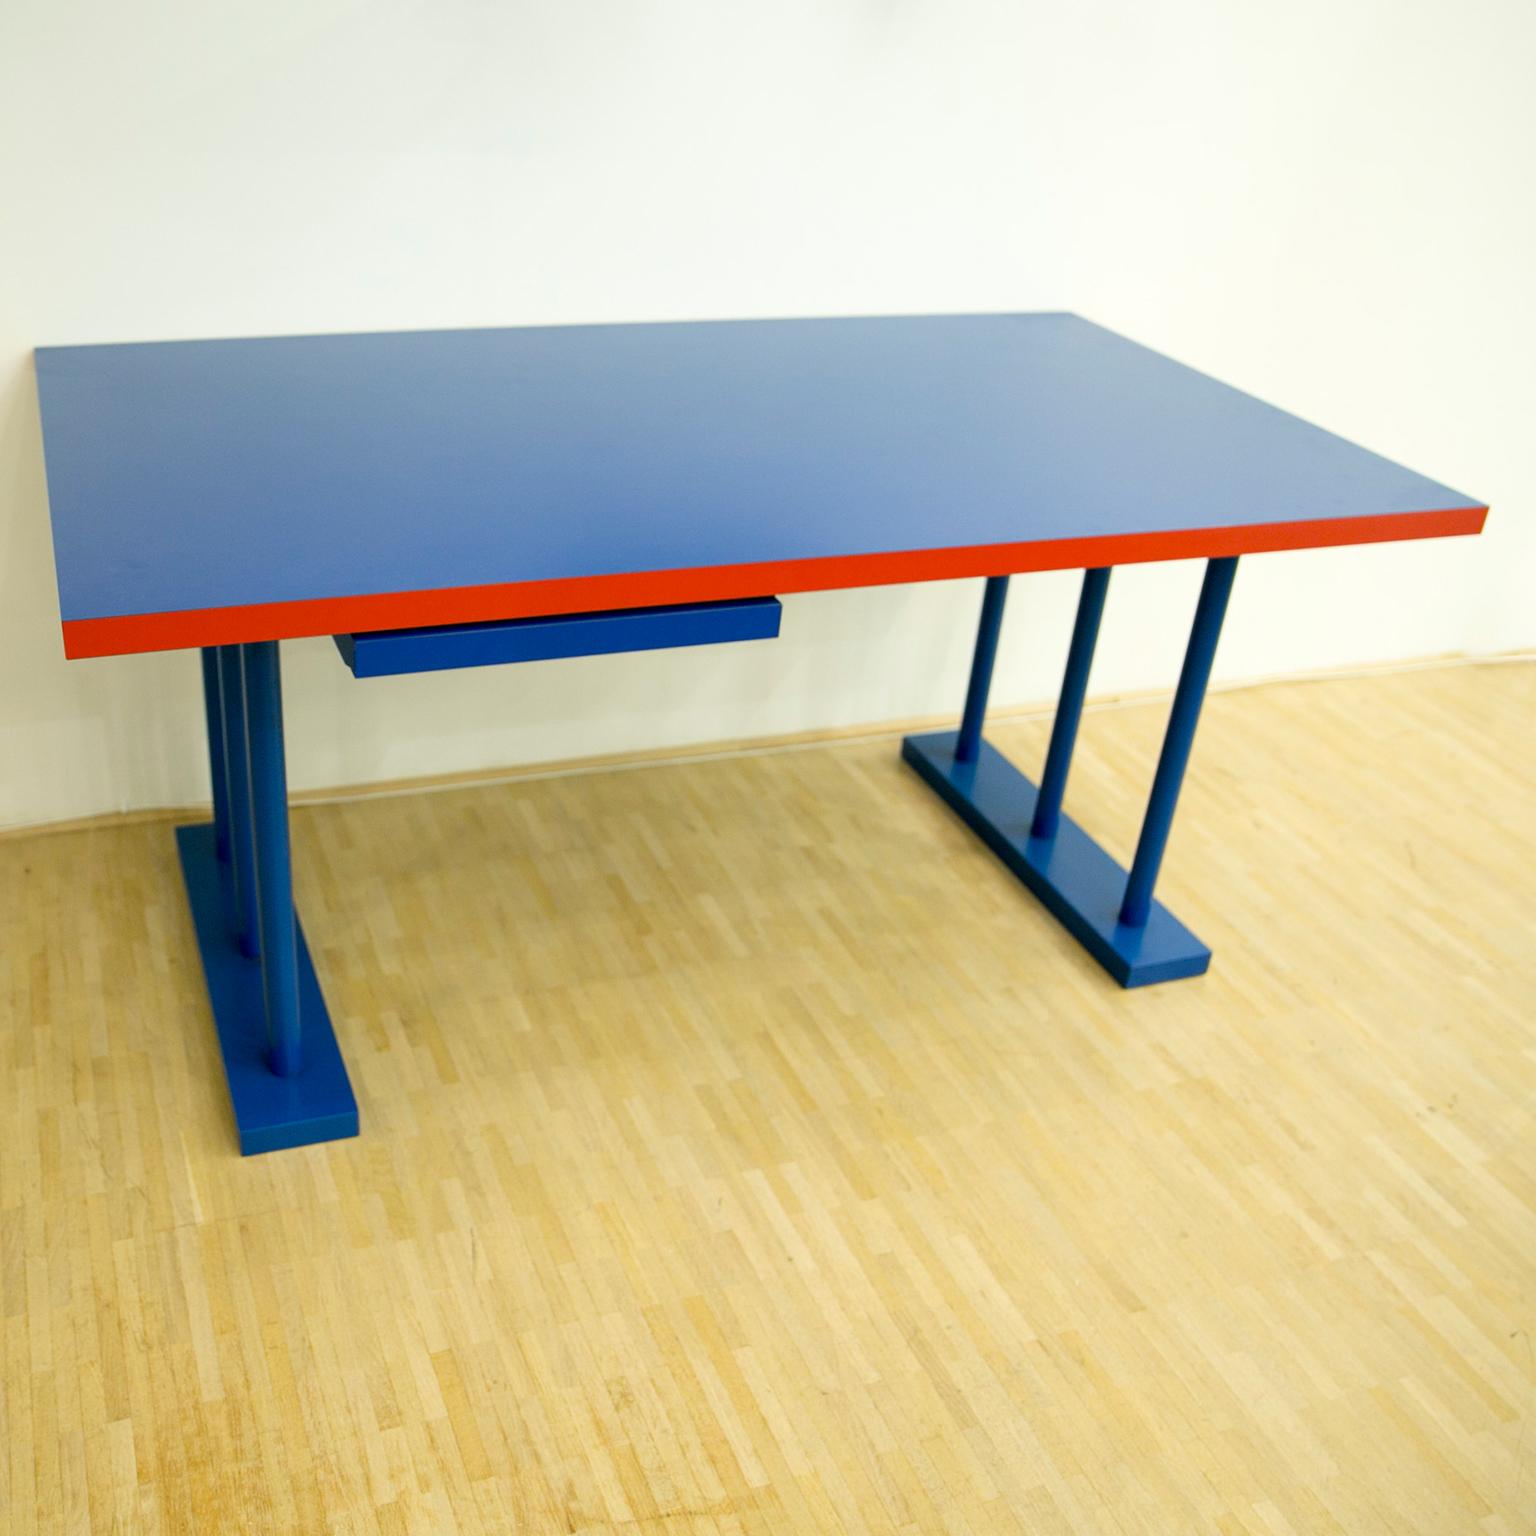 Impressive Italian desk by an unknown designer from the early nineties in electric blue and deep red. Memphis style with a minimalistic touch.
Measures: W 160 cm x D 90 cm x H 74 cm.